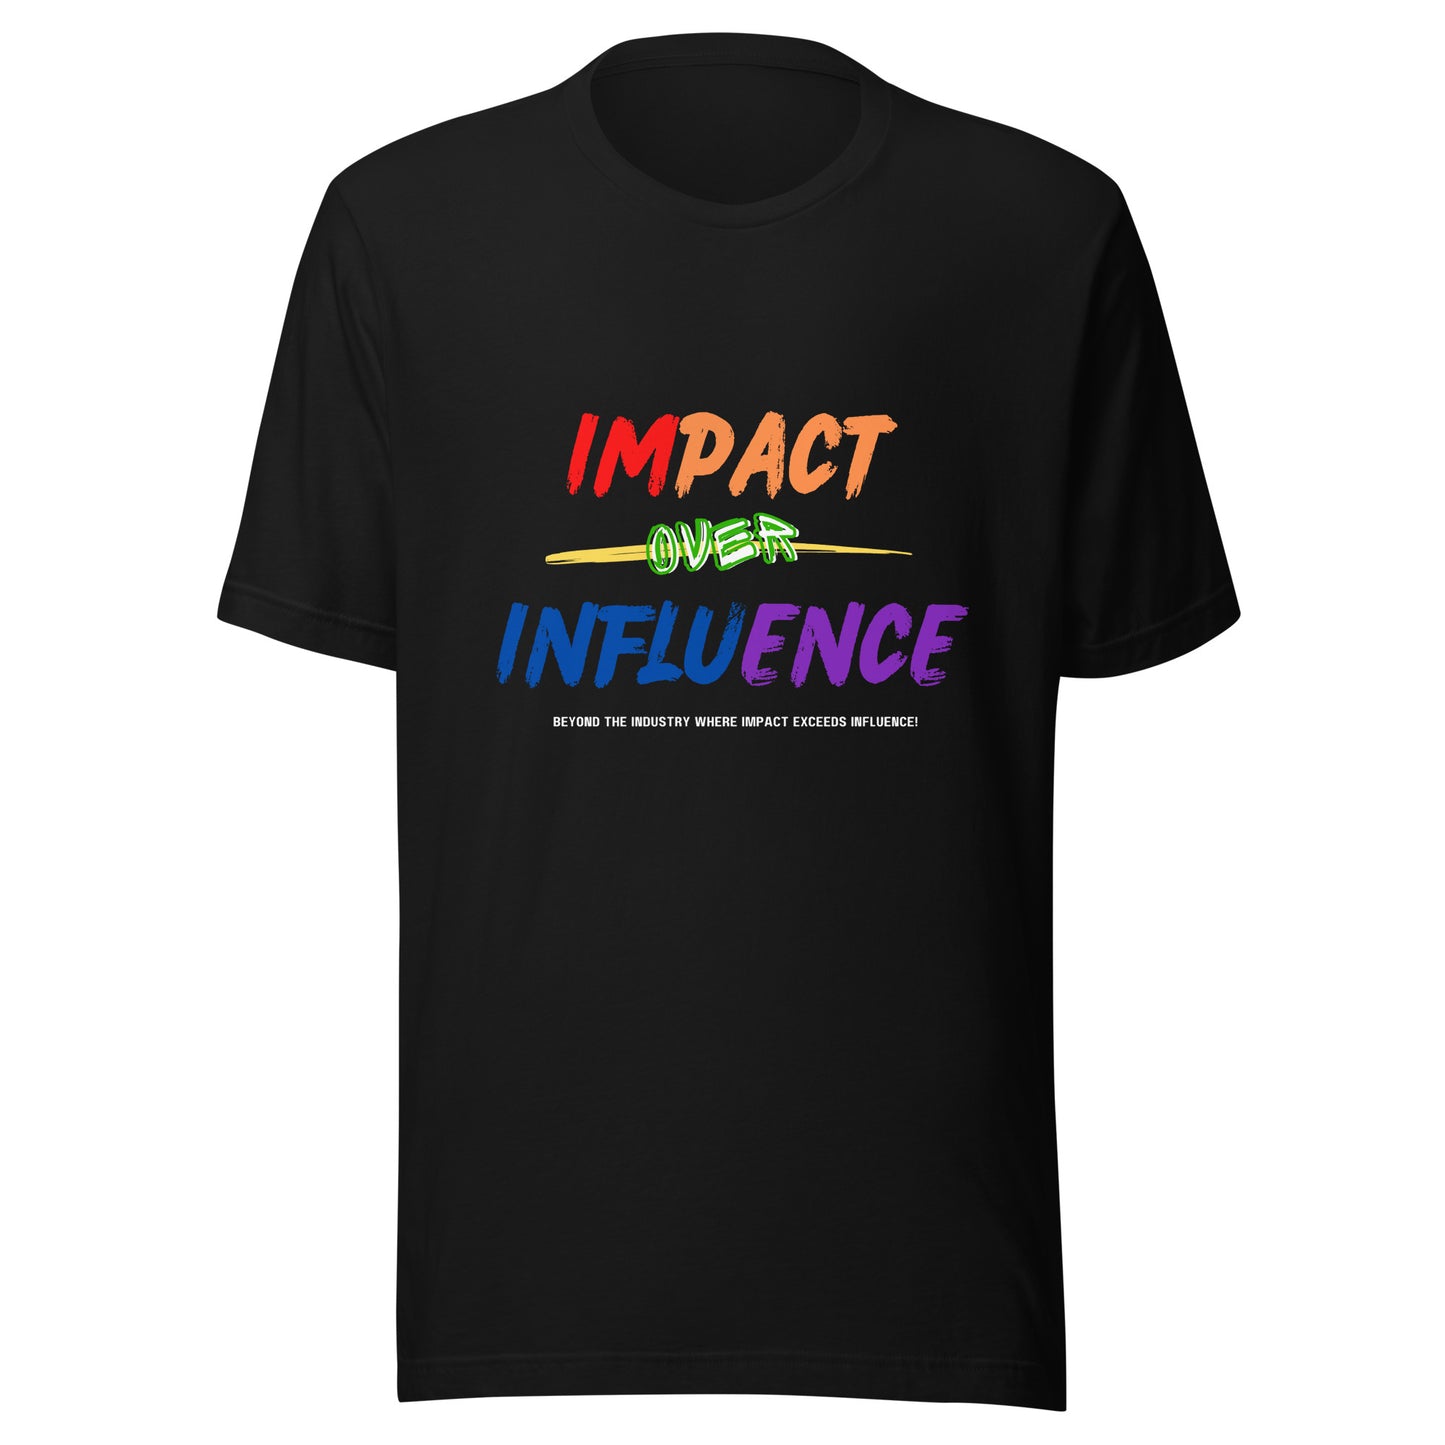 IMPACT OVER INFLUENCE (MULTI-COLOR)